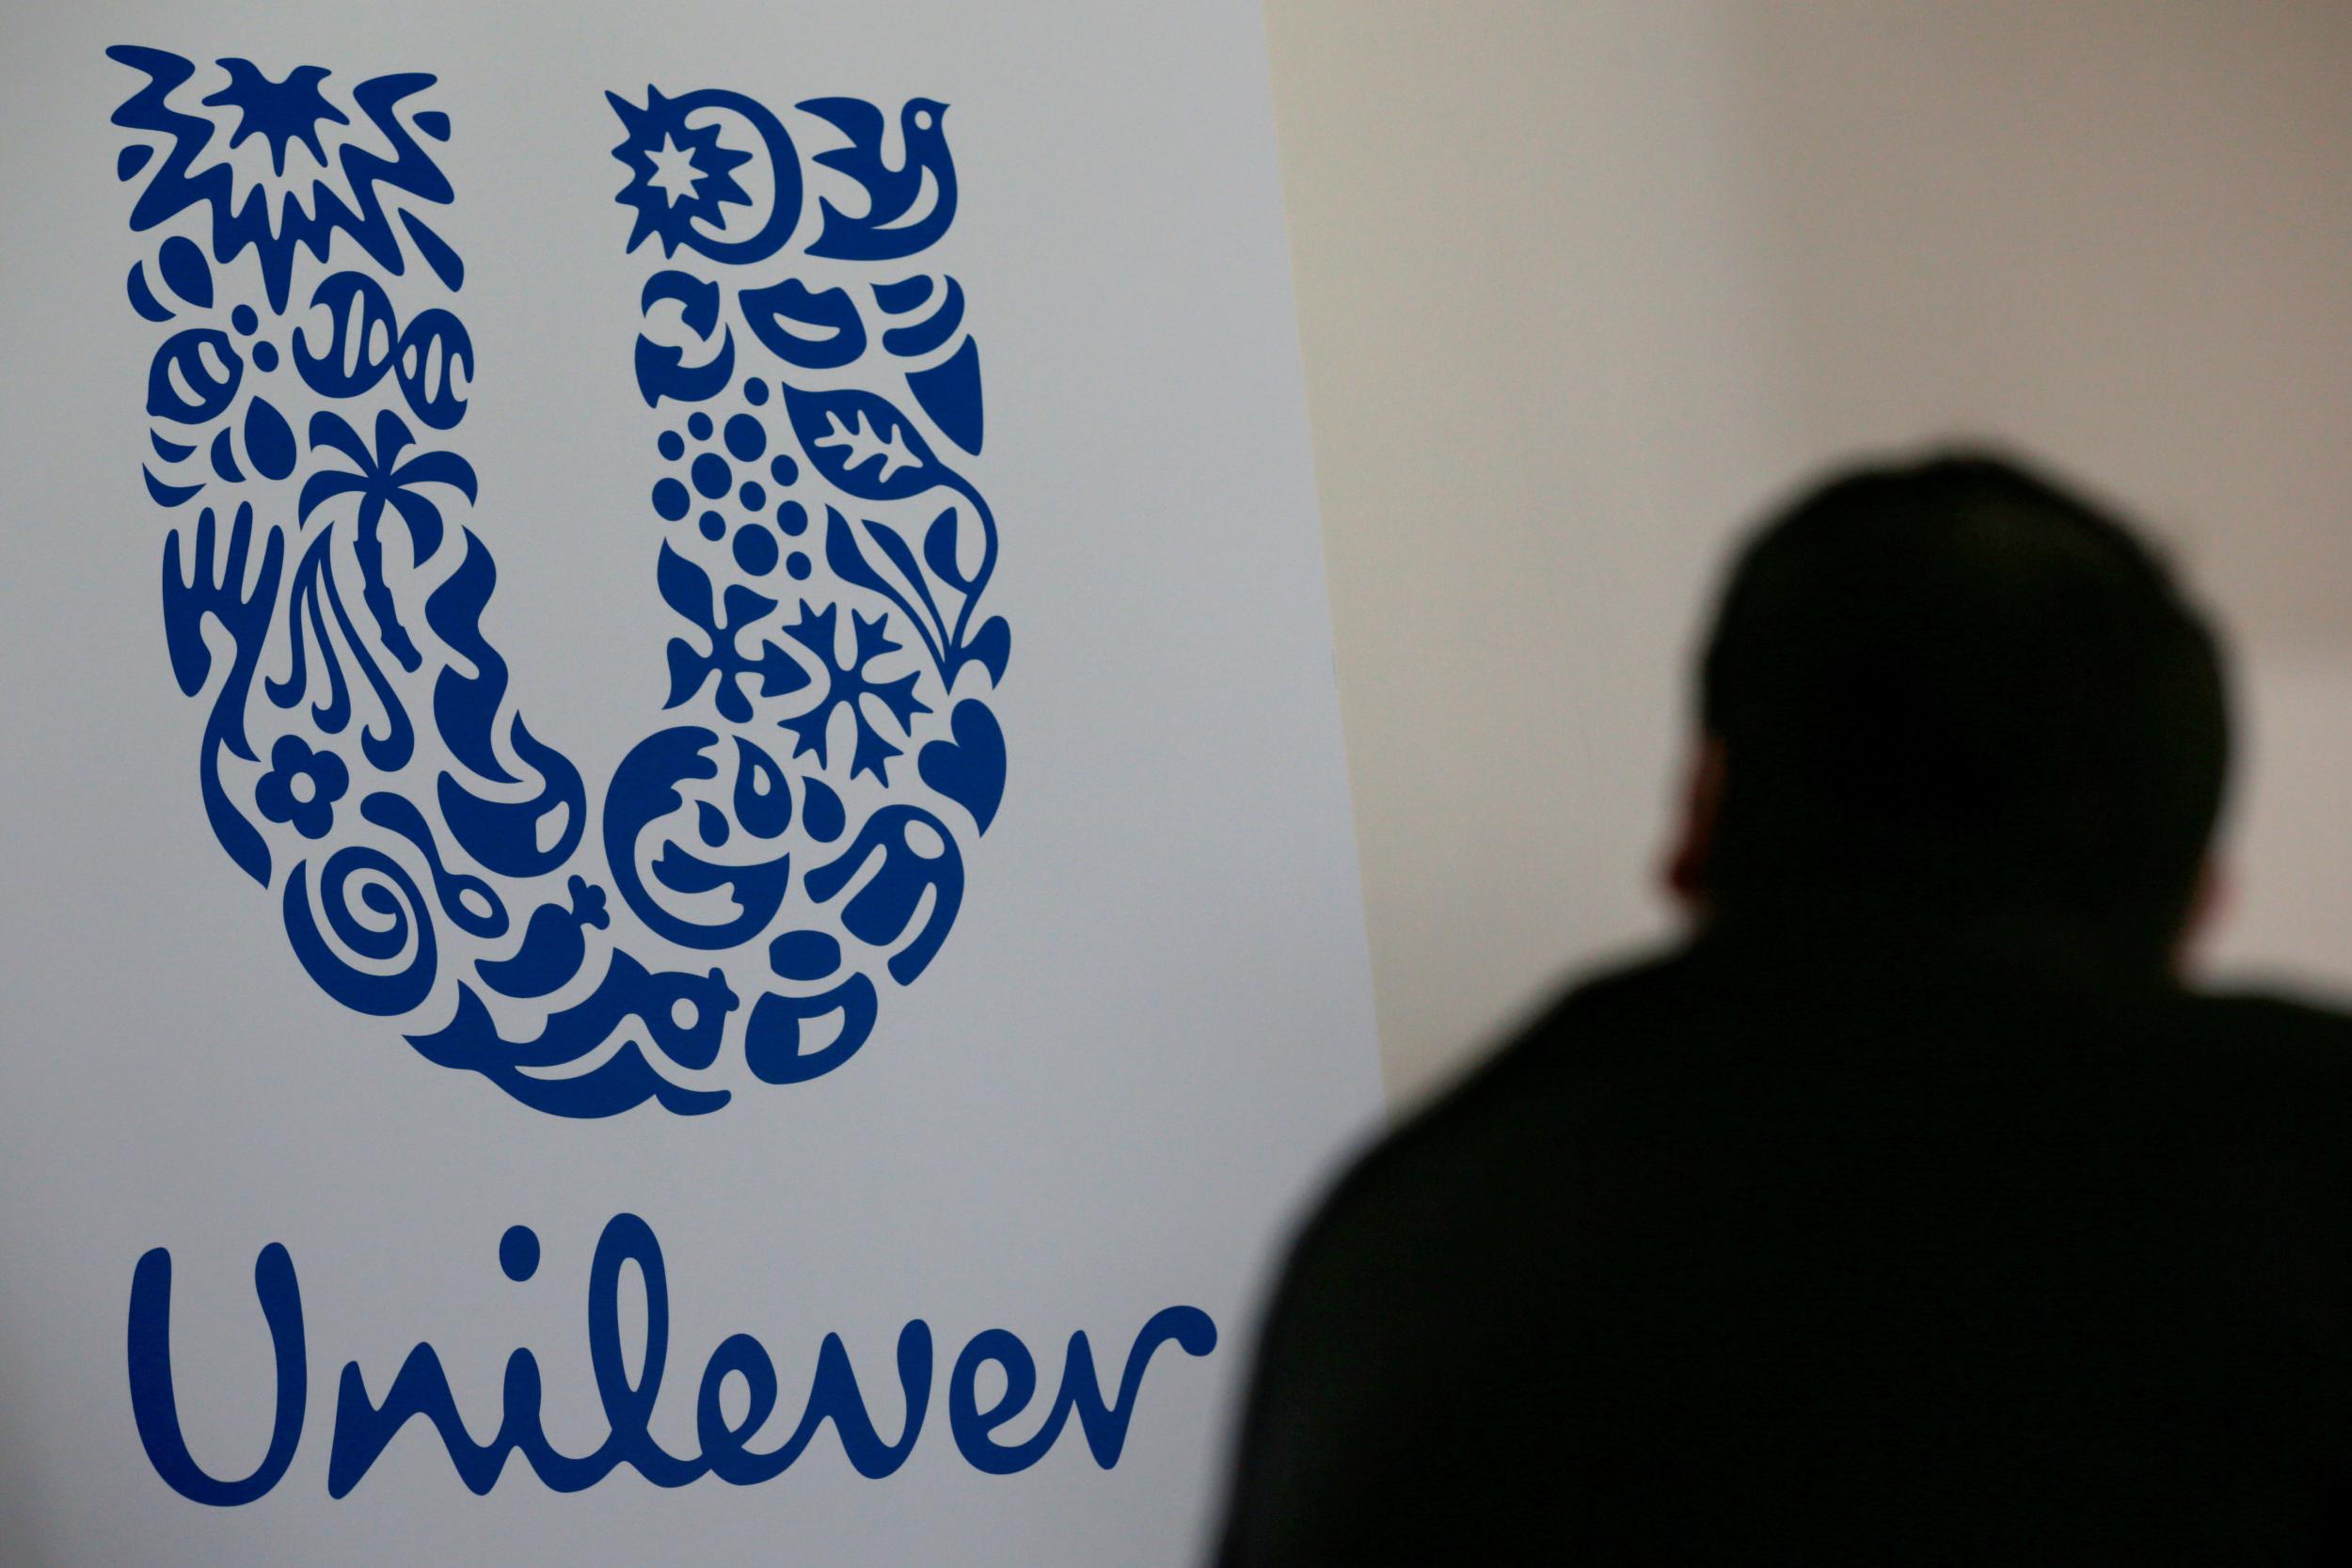 Unilever was the belle of the stock market's ball as it released its latest results